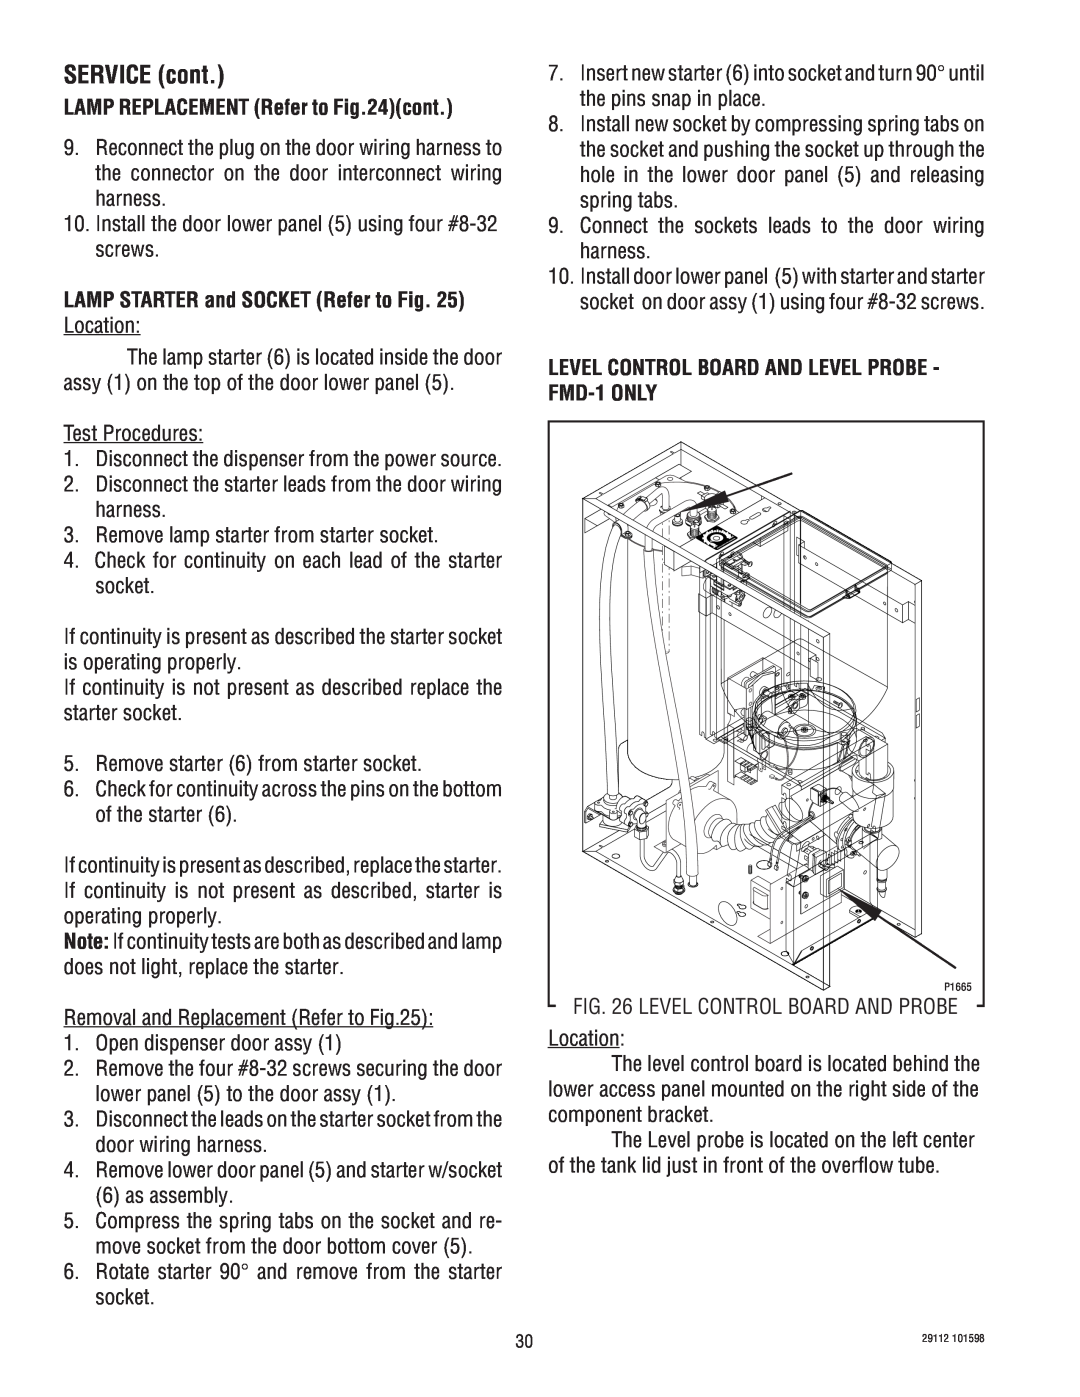 Bunn FMD-1 FMD-2 service manual LAMP REPLACEMENT Refer to cont, LAMP STARTER and SOCKET Refer to Location, SERVICE cont 